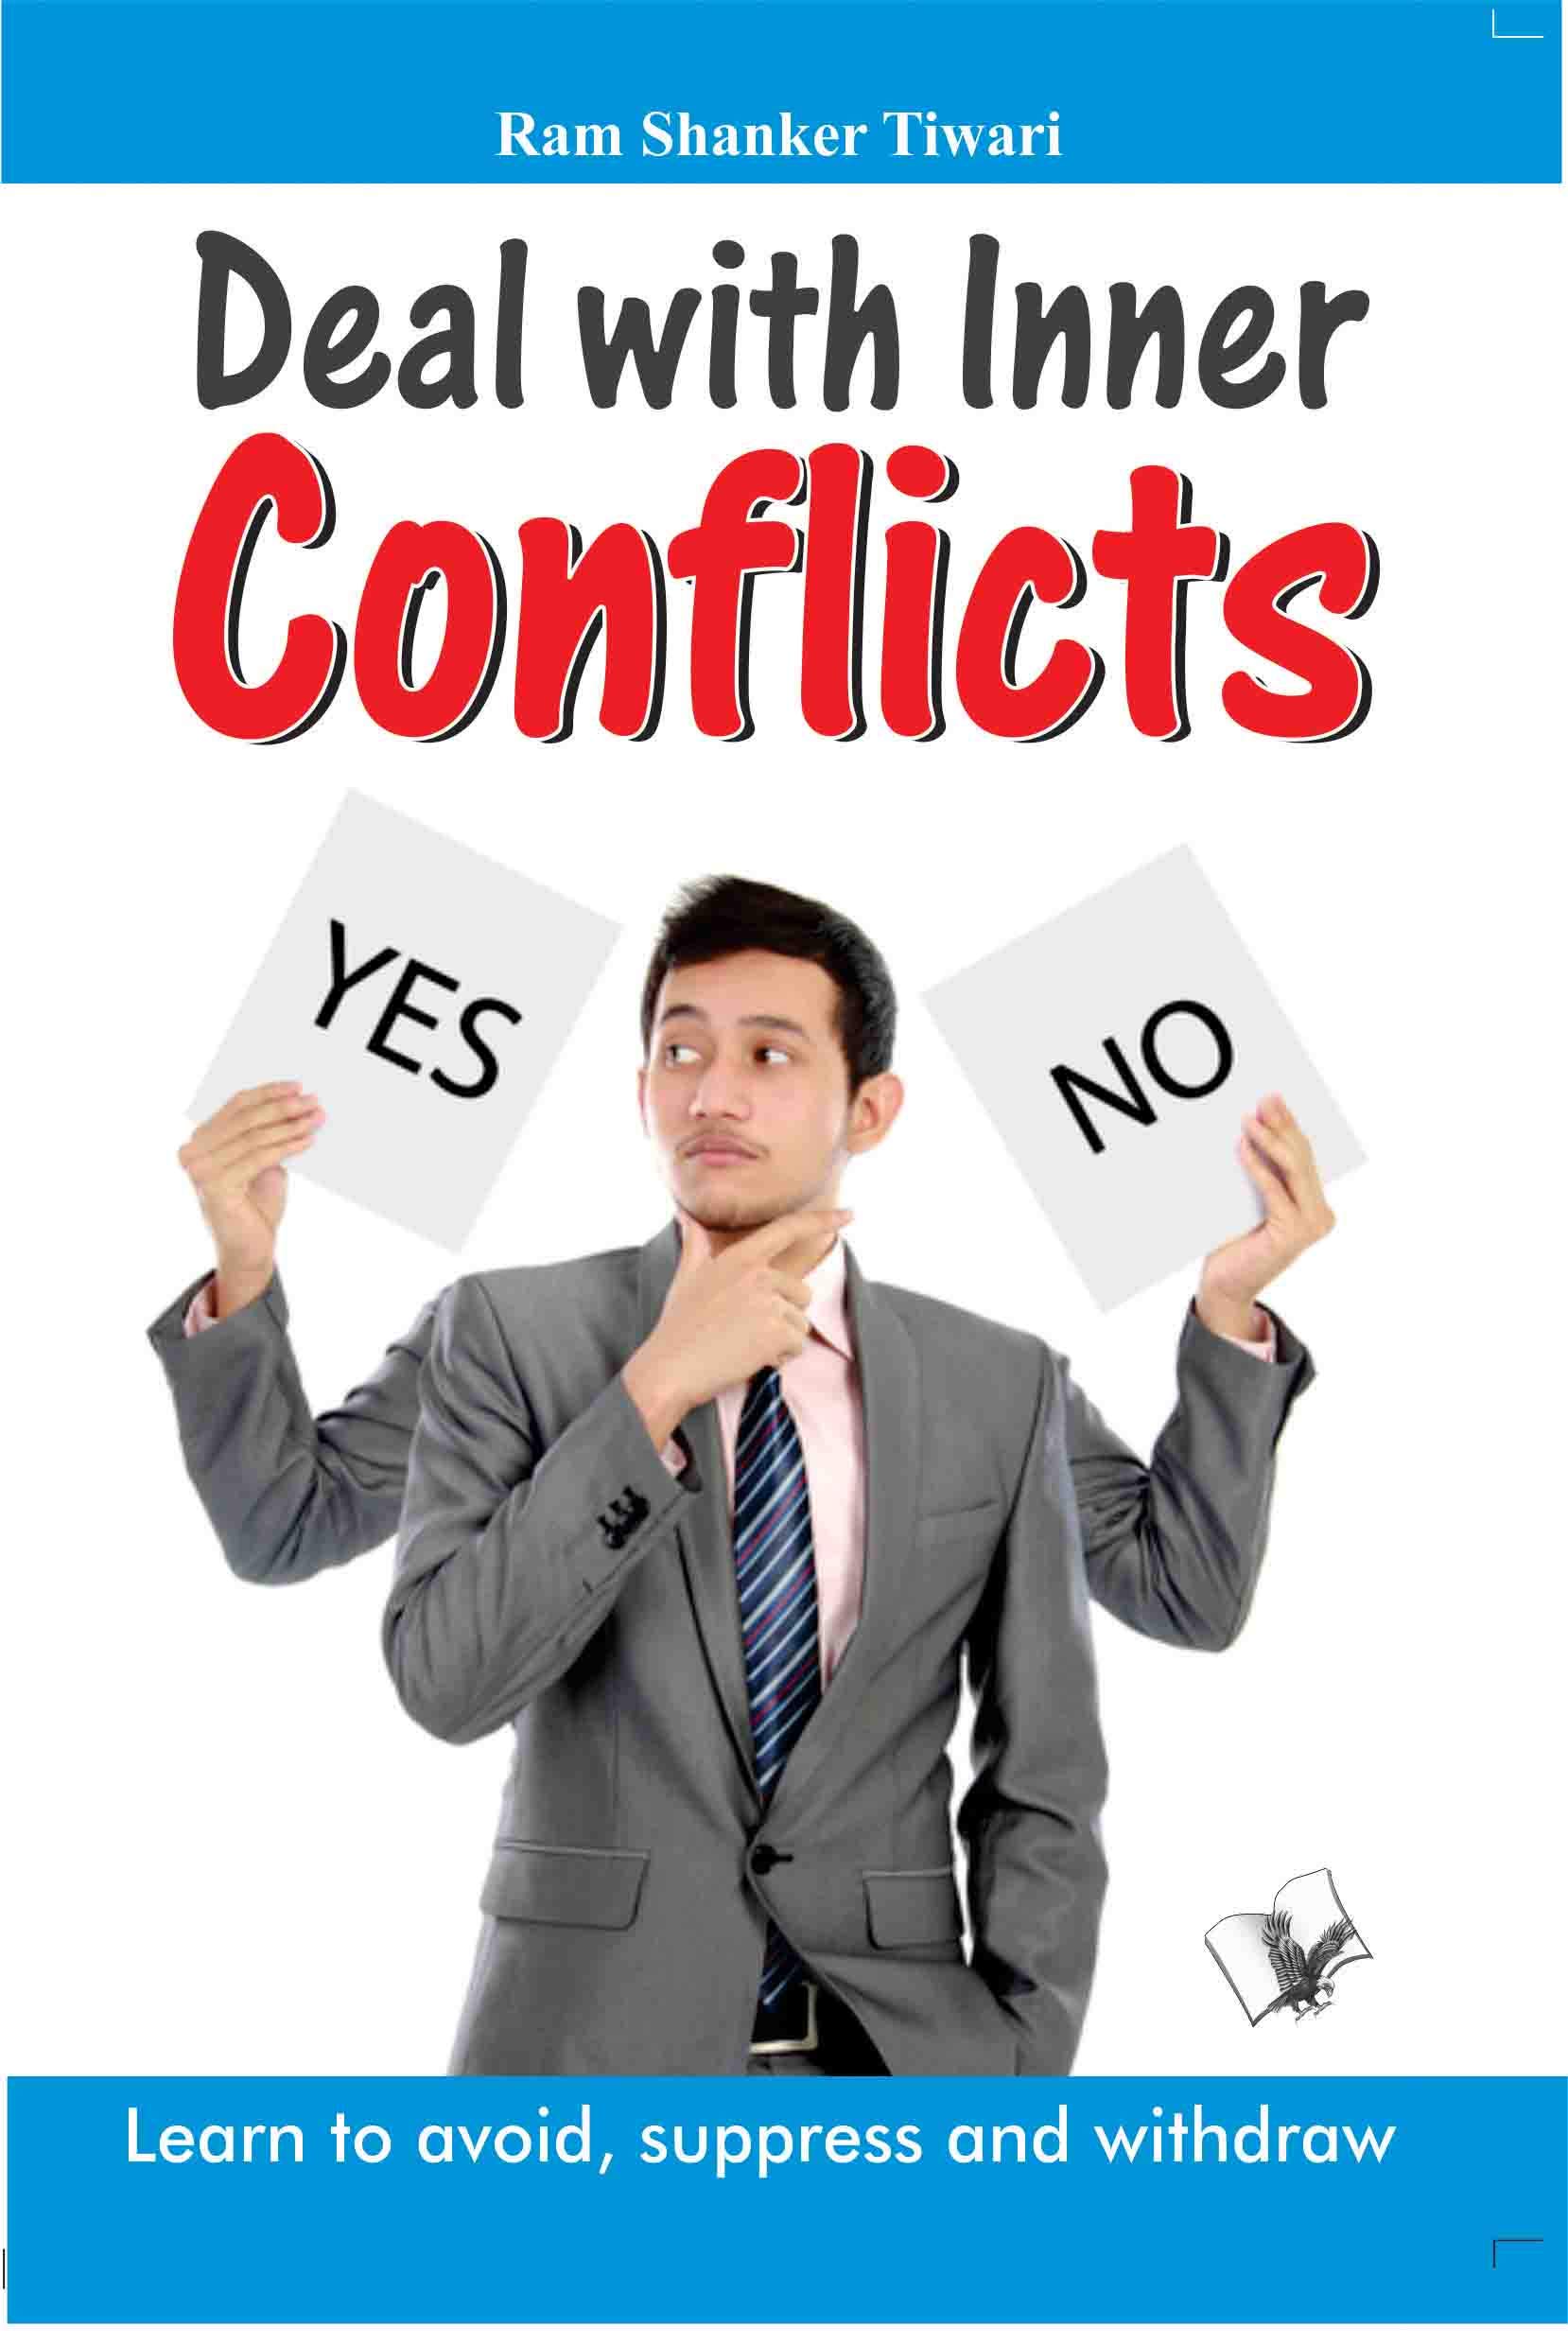 DEAL WITH INNER CONFLICTS: LEARN TO AVOID, SUPPRESS AND WITHDRAW